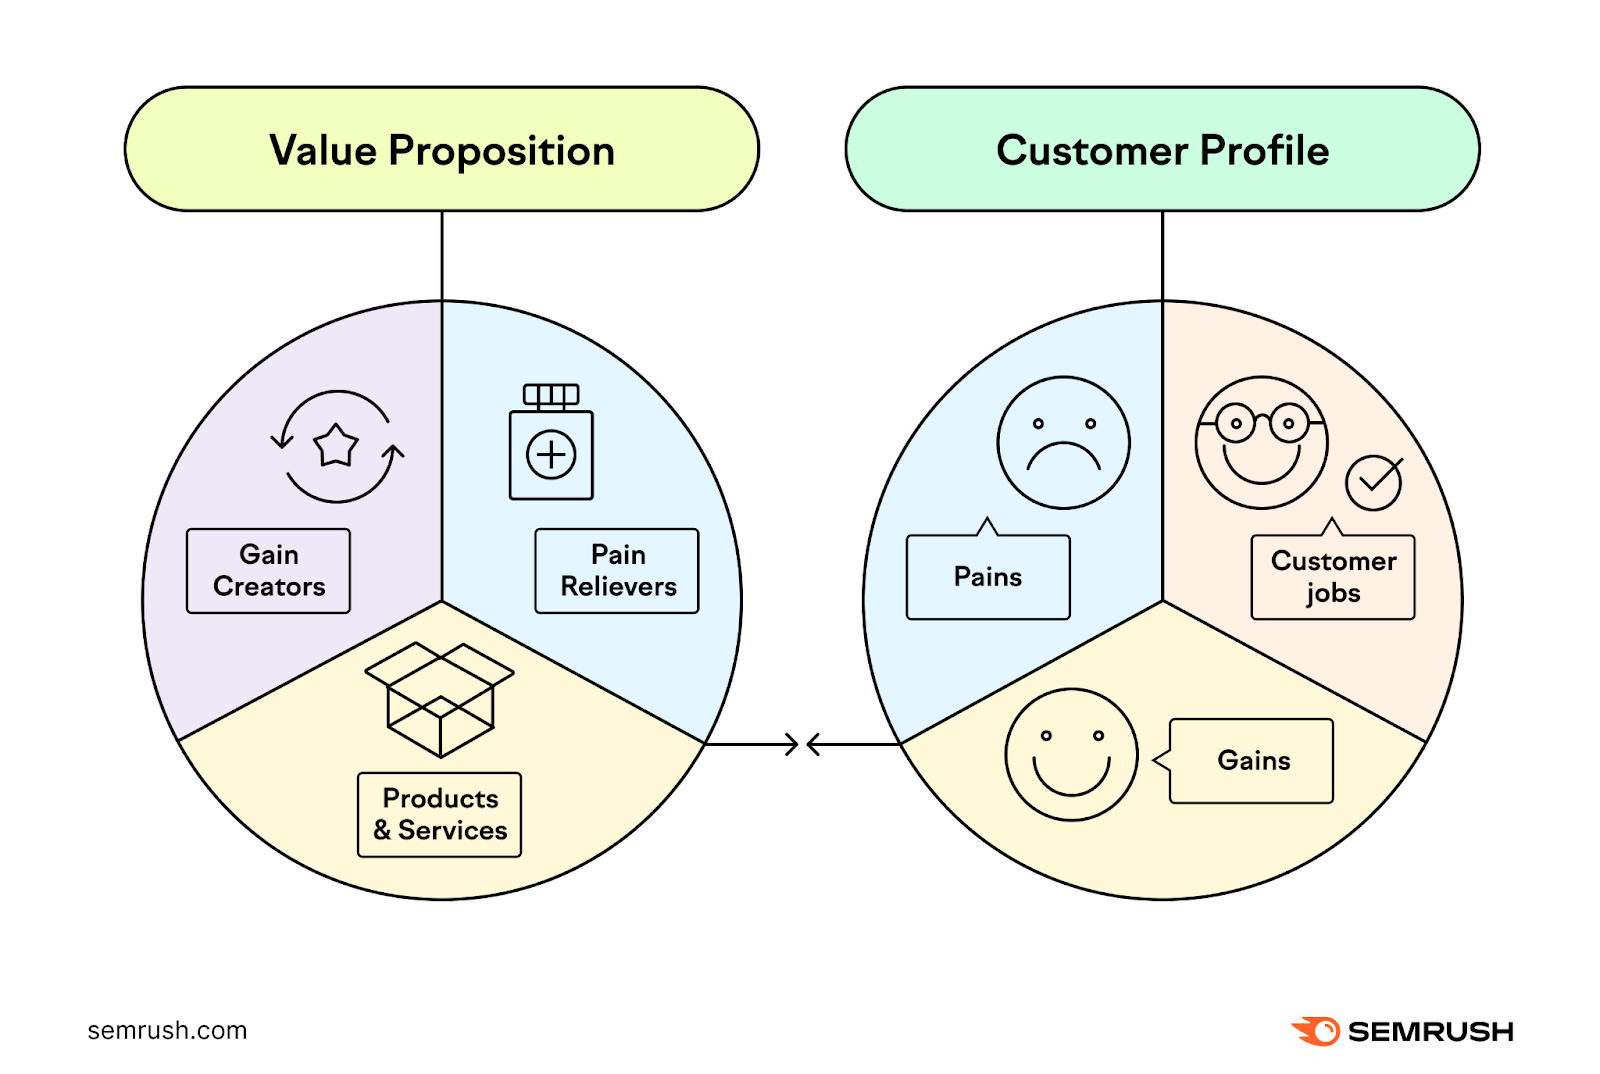 An example of a value proposition canvas template